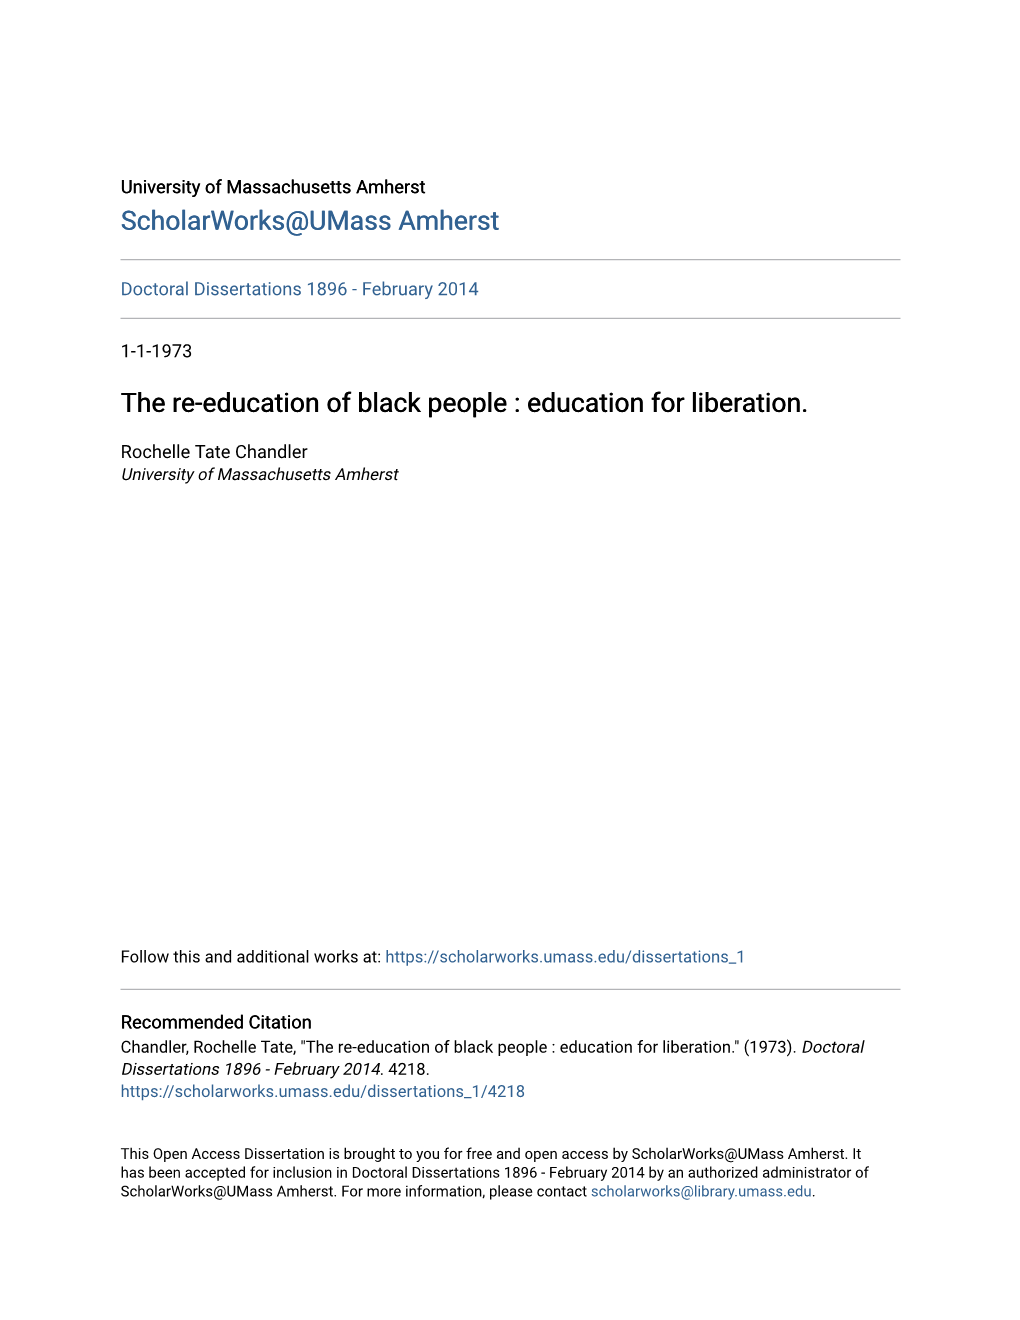 The Re-Education of Black People : Education for Liberation